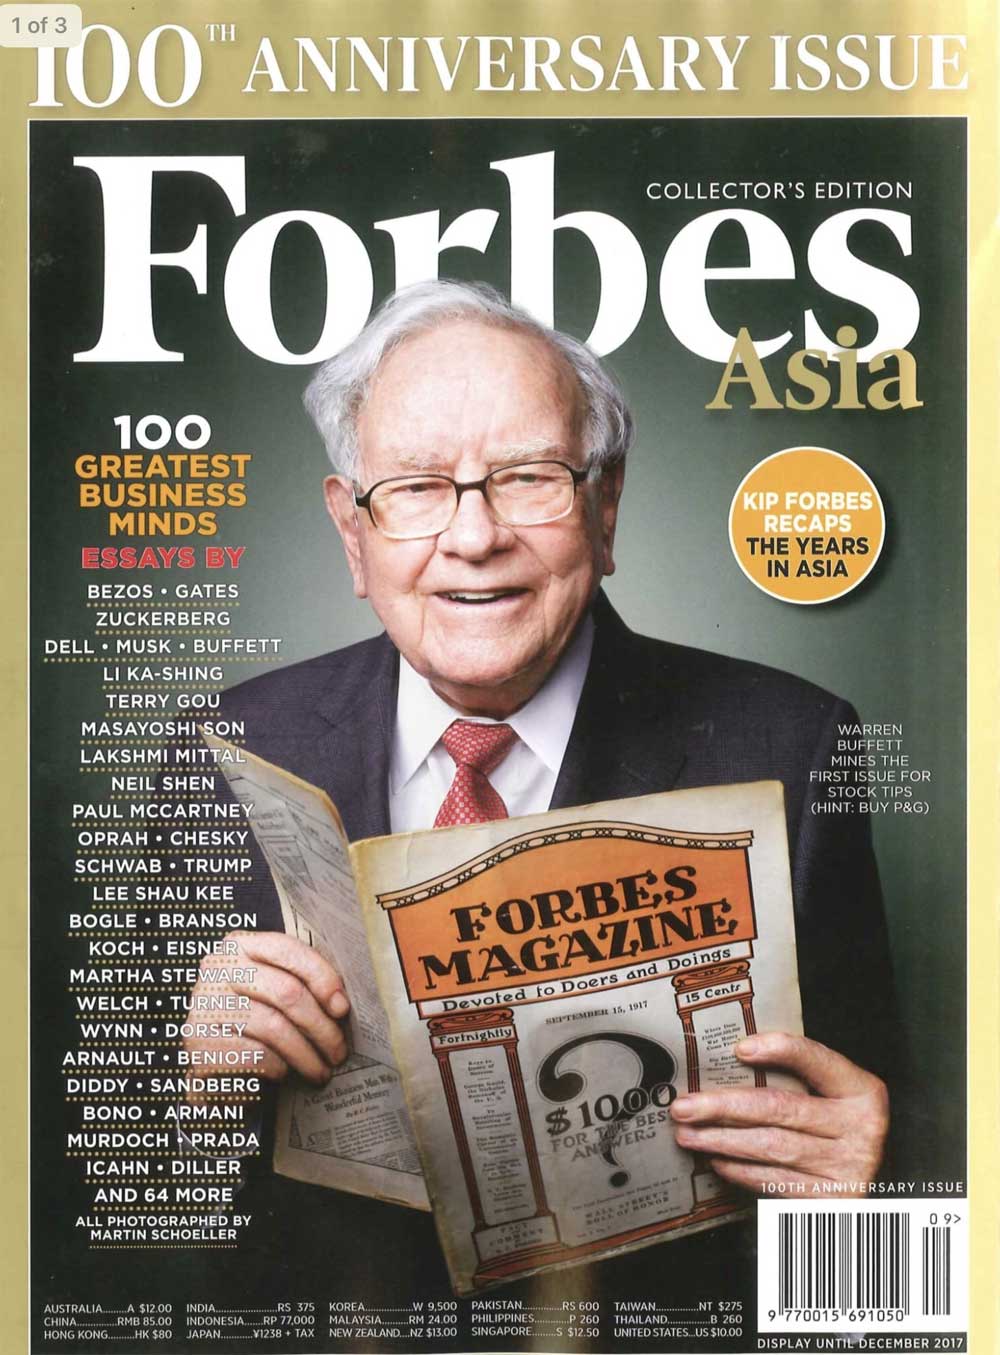 Bookdoc in the 100th yr anniversary issue of Forbes